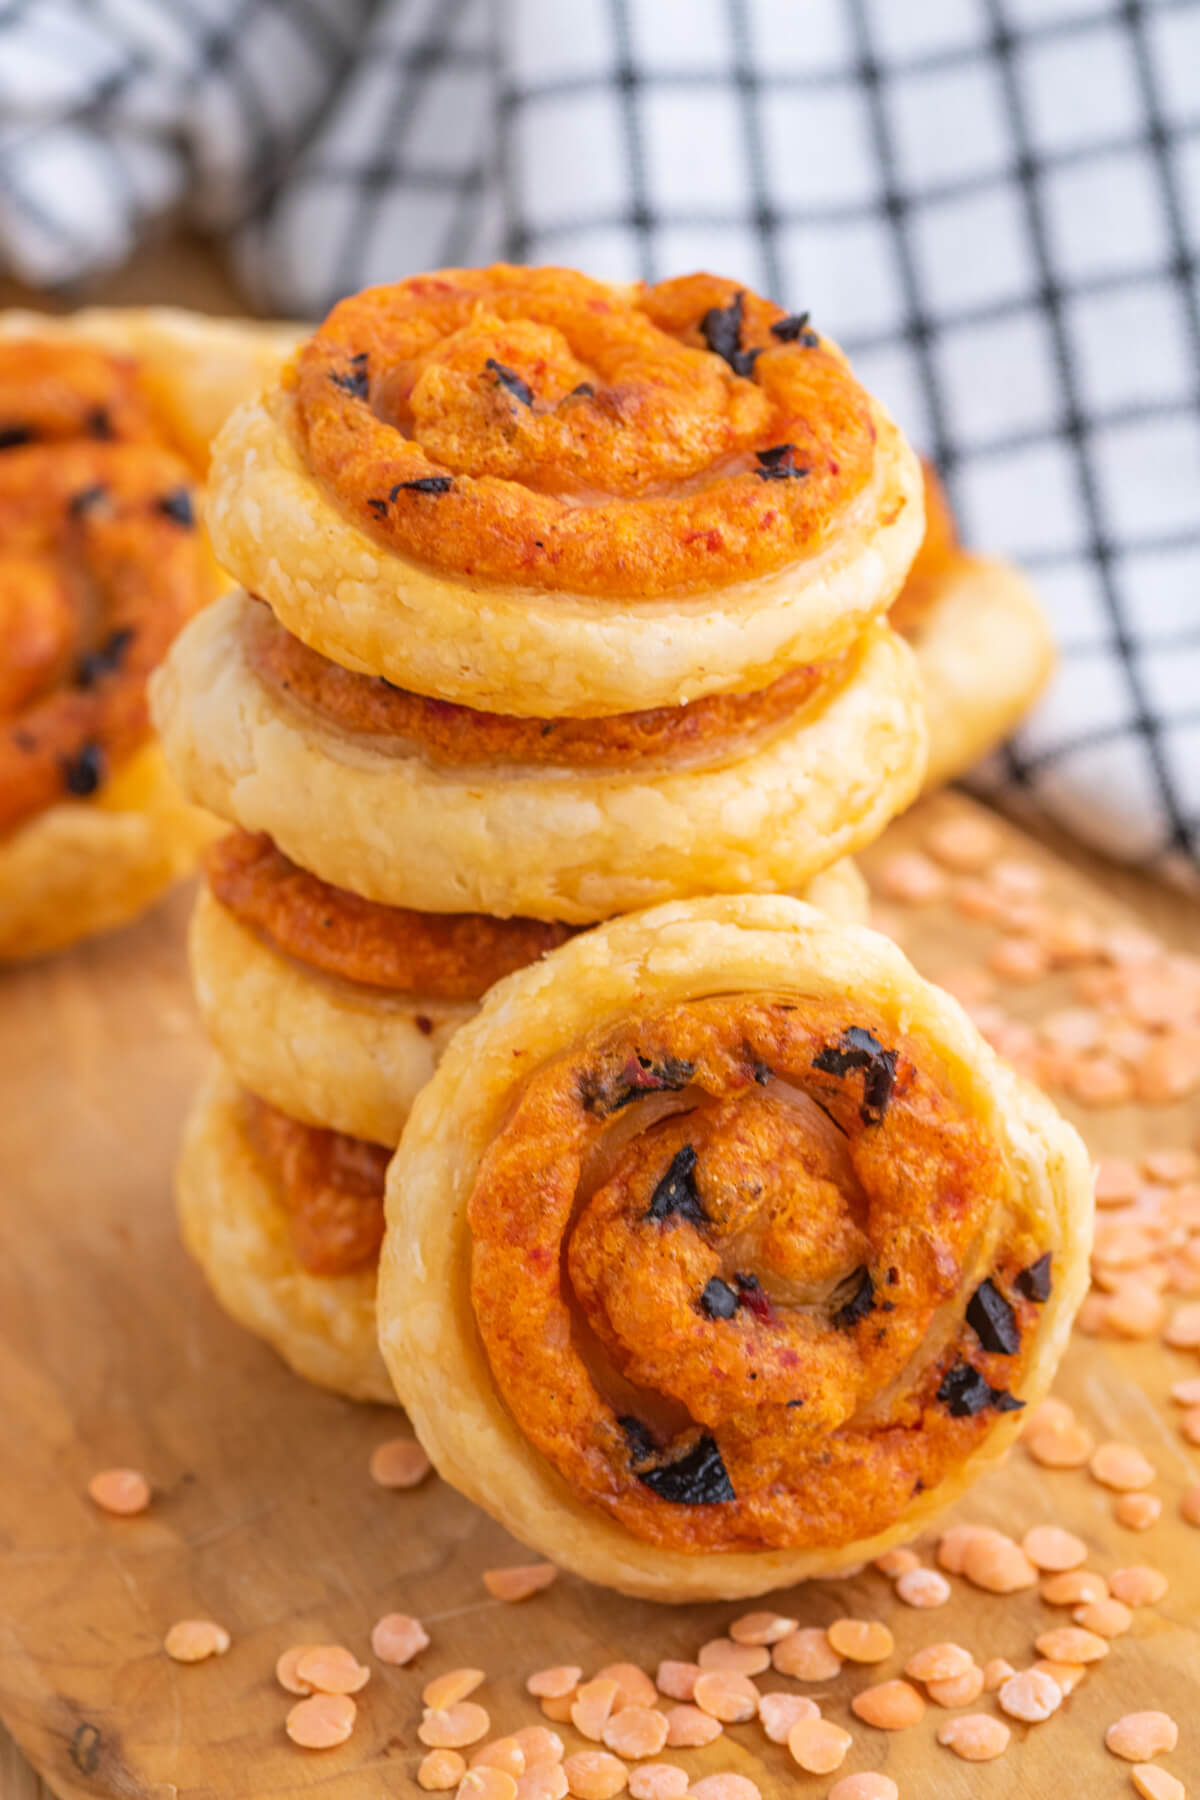 A stack of golden baked puff pastry pinwheels on a wooden board garnished with red lentils.